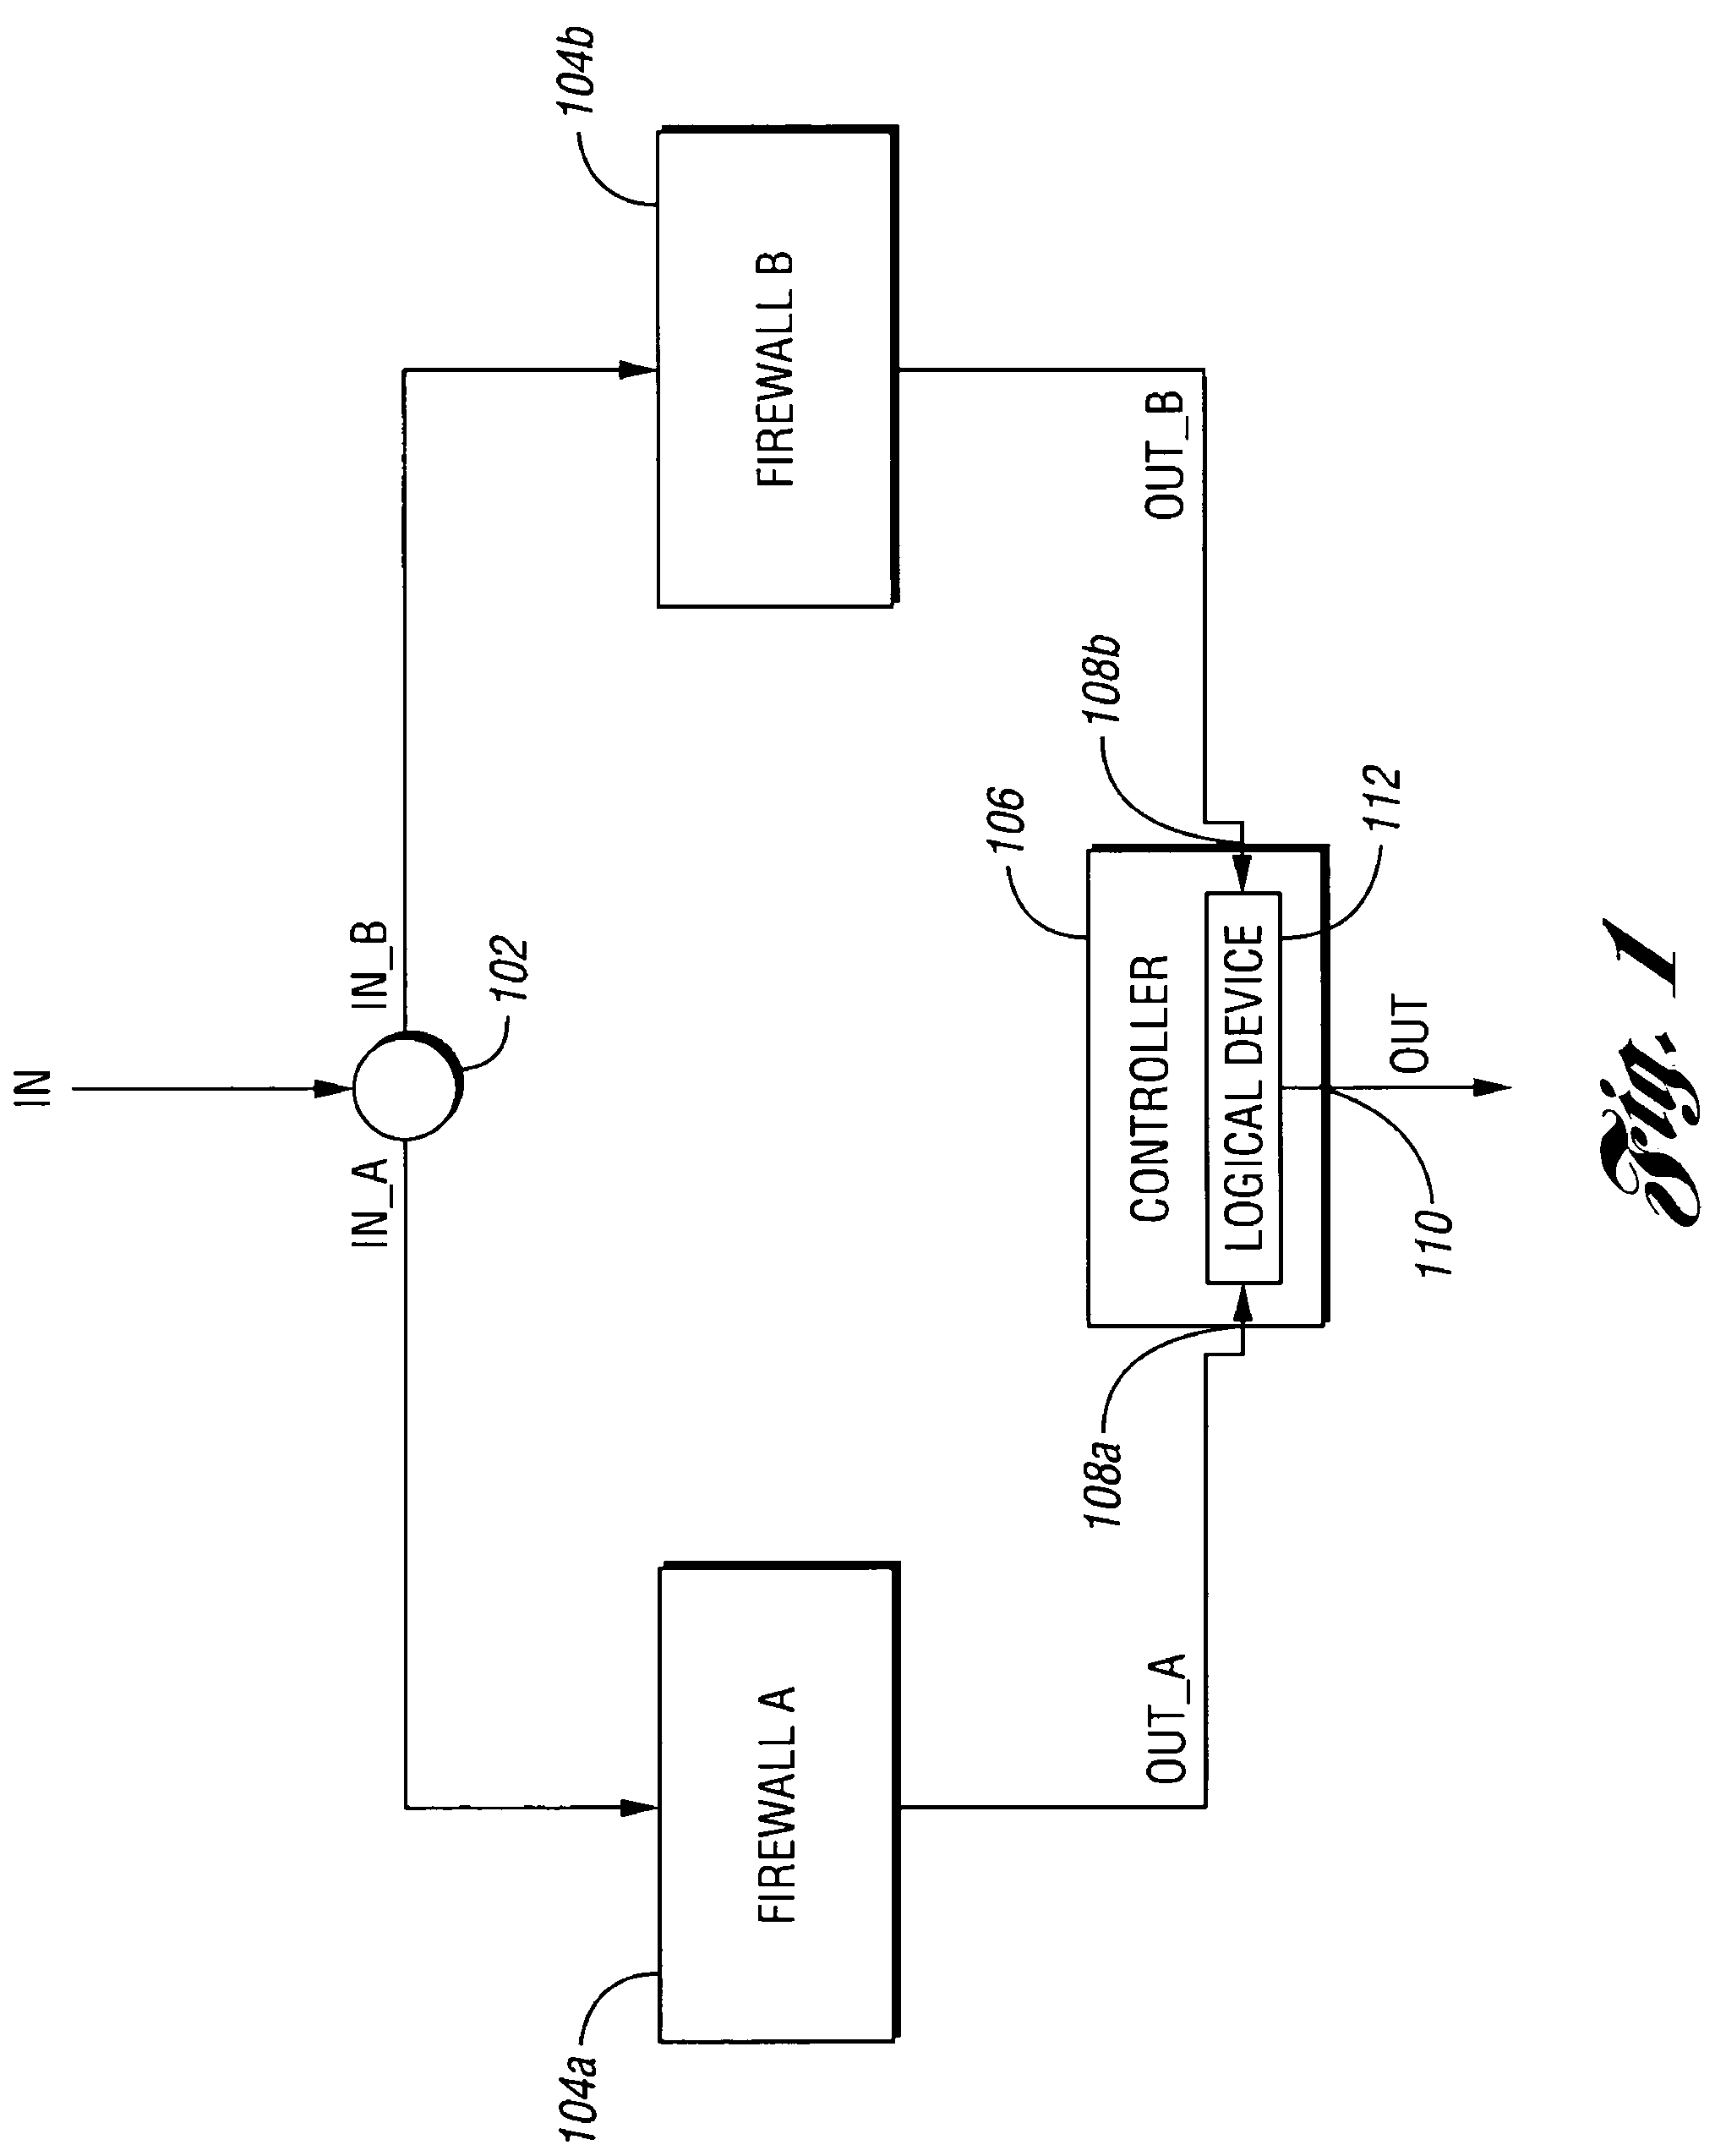 System and method for reducing data stream interruption during failure of a firewall device